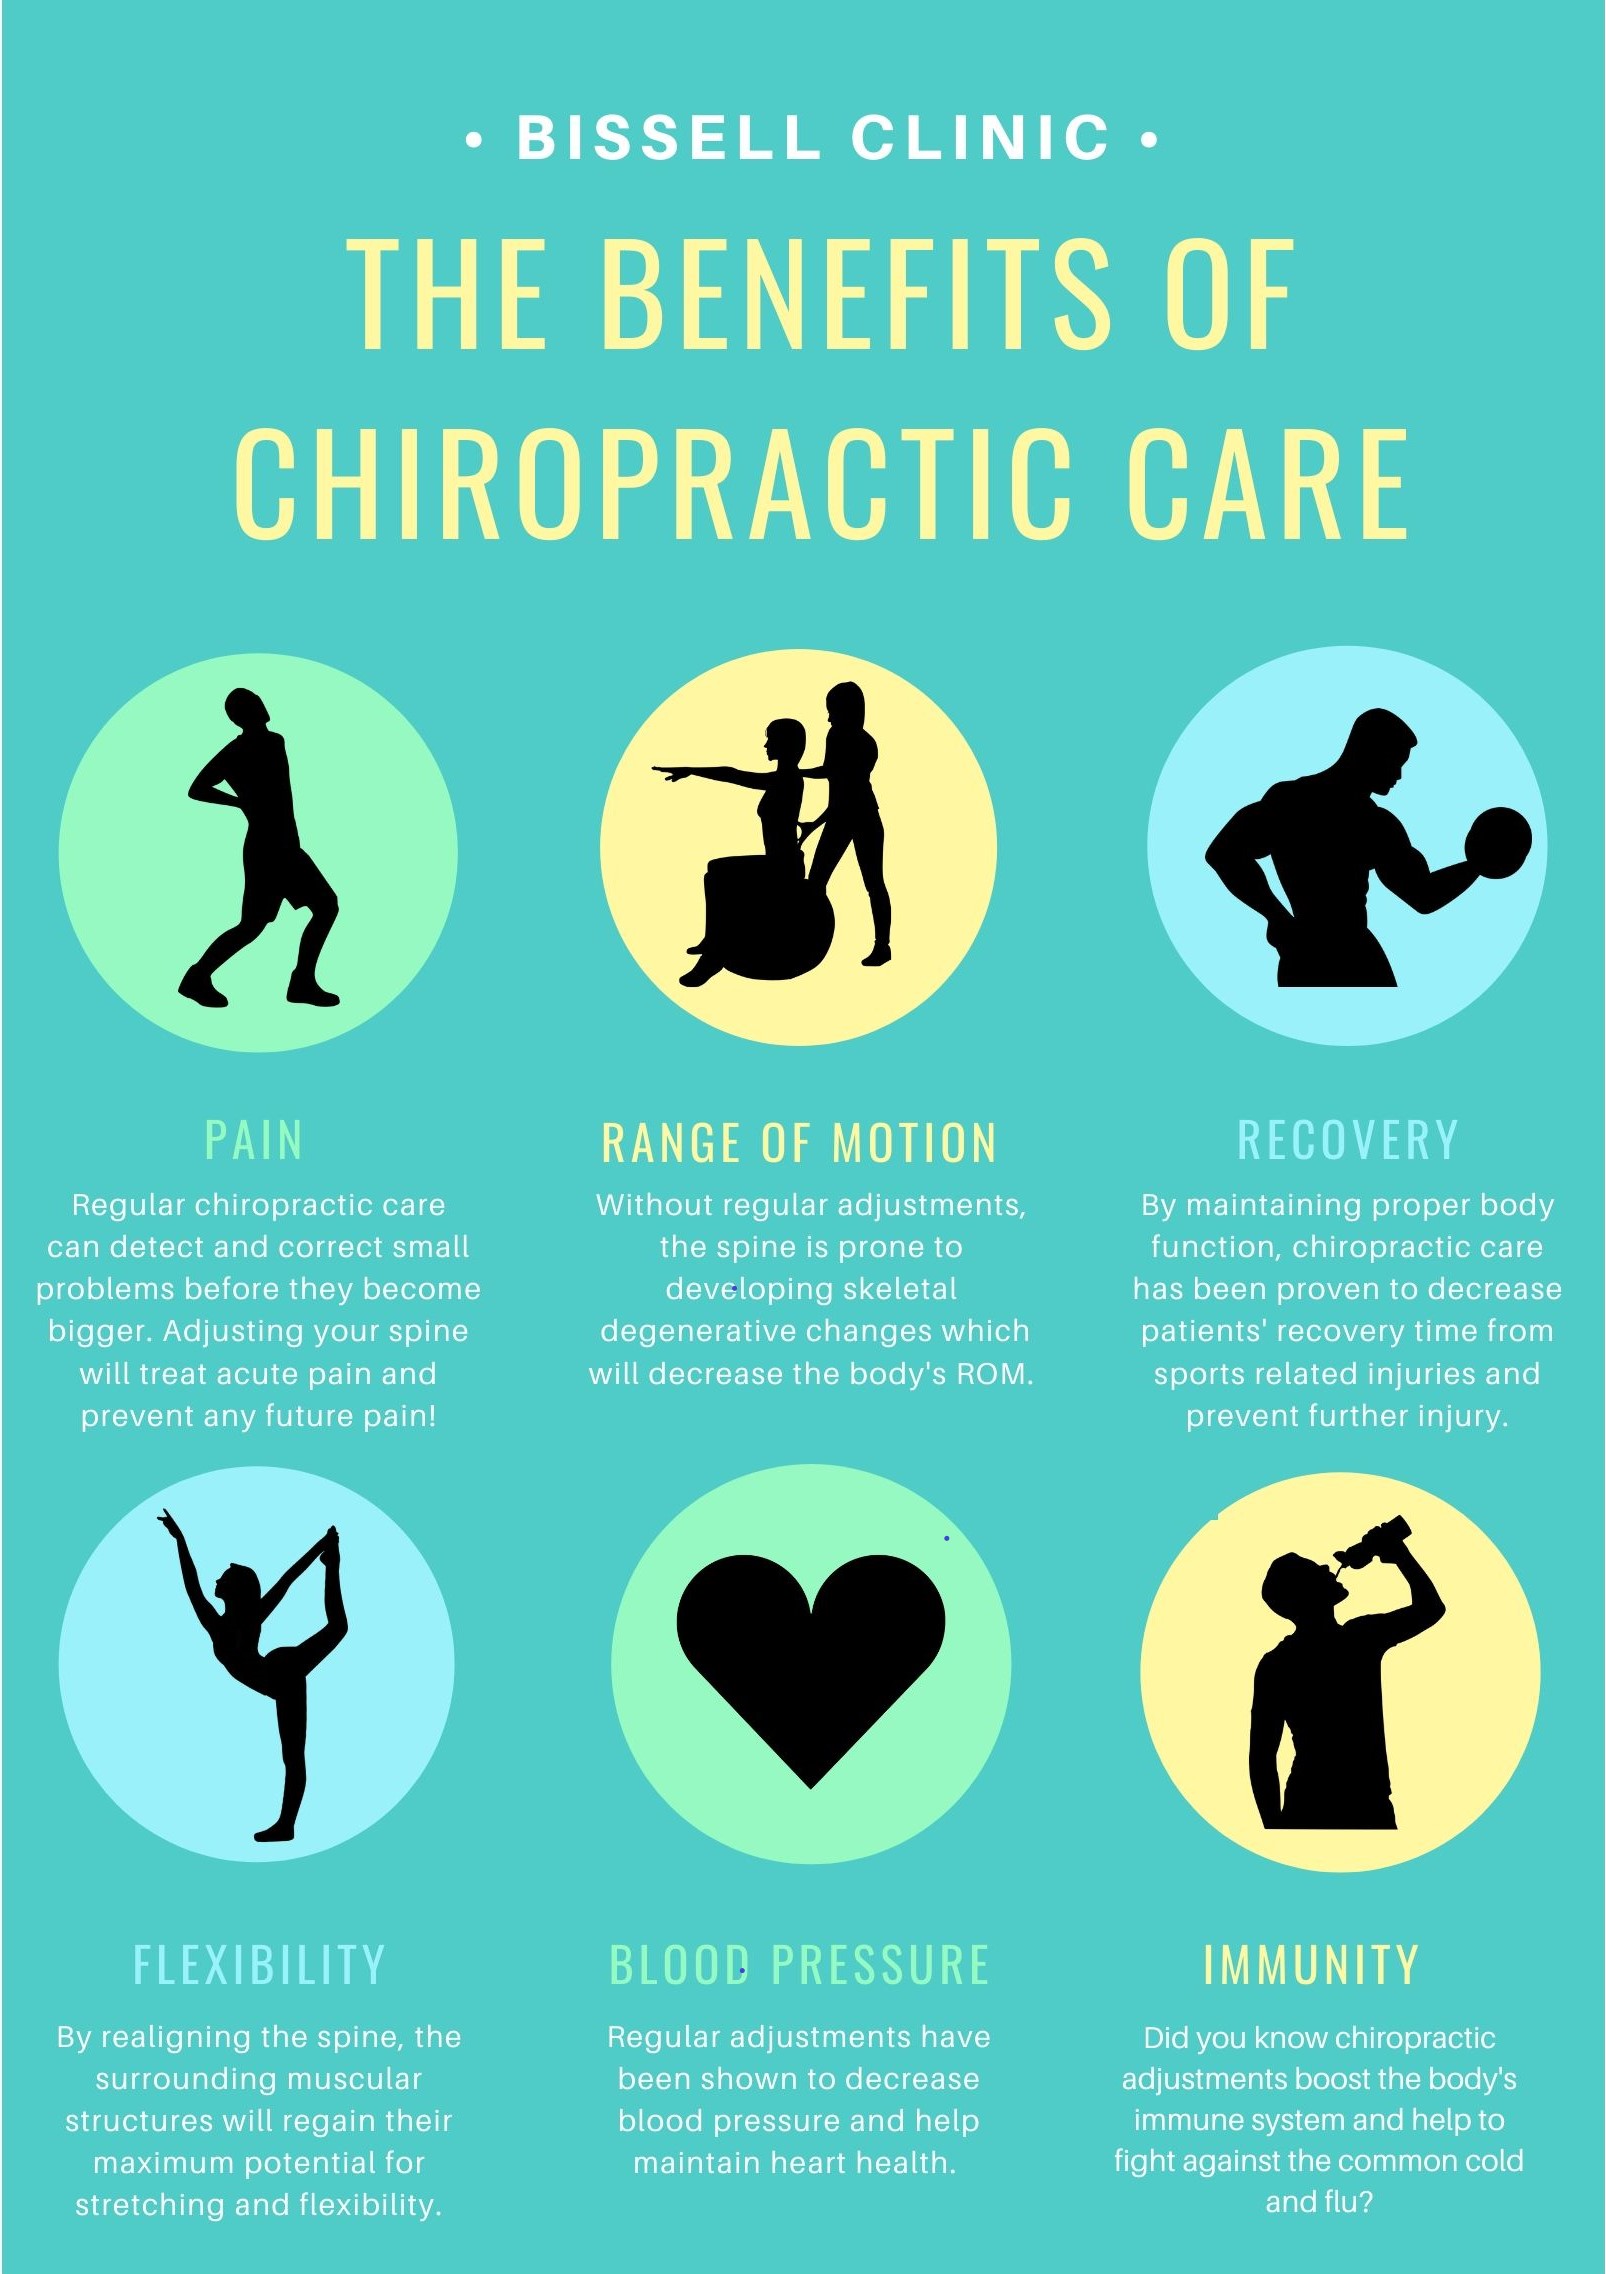 6 Benefits of Chiropractic Care